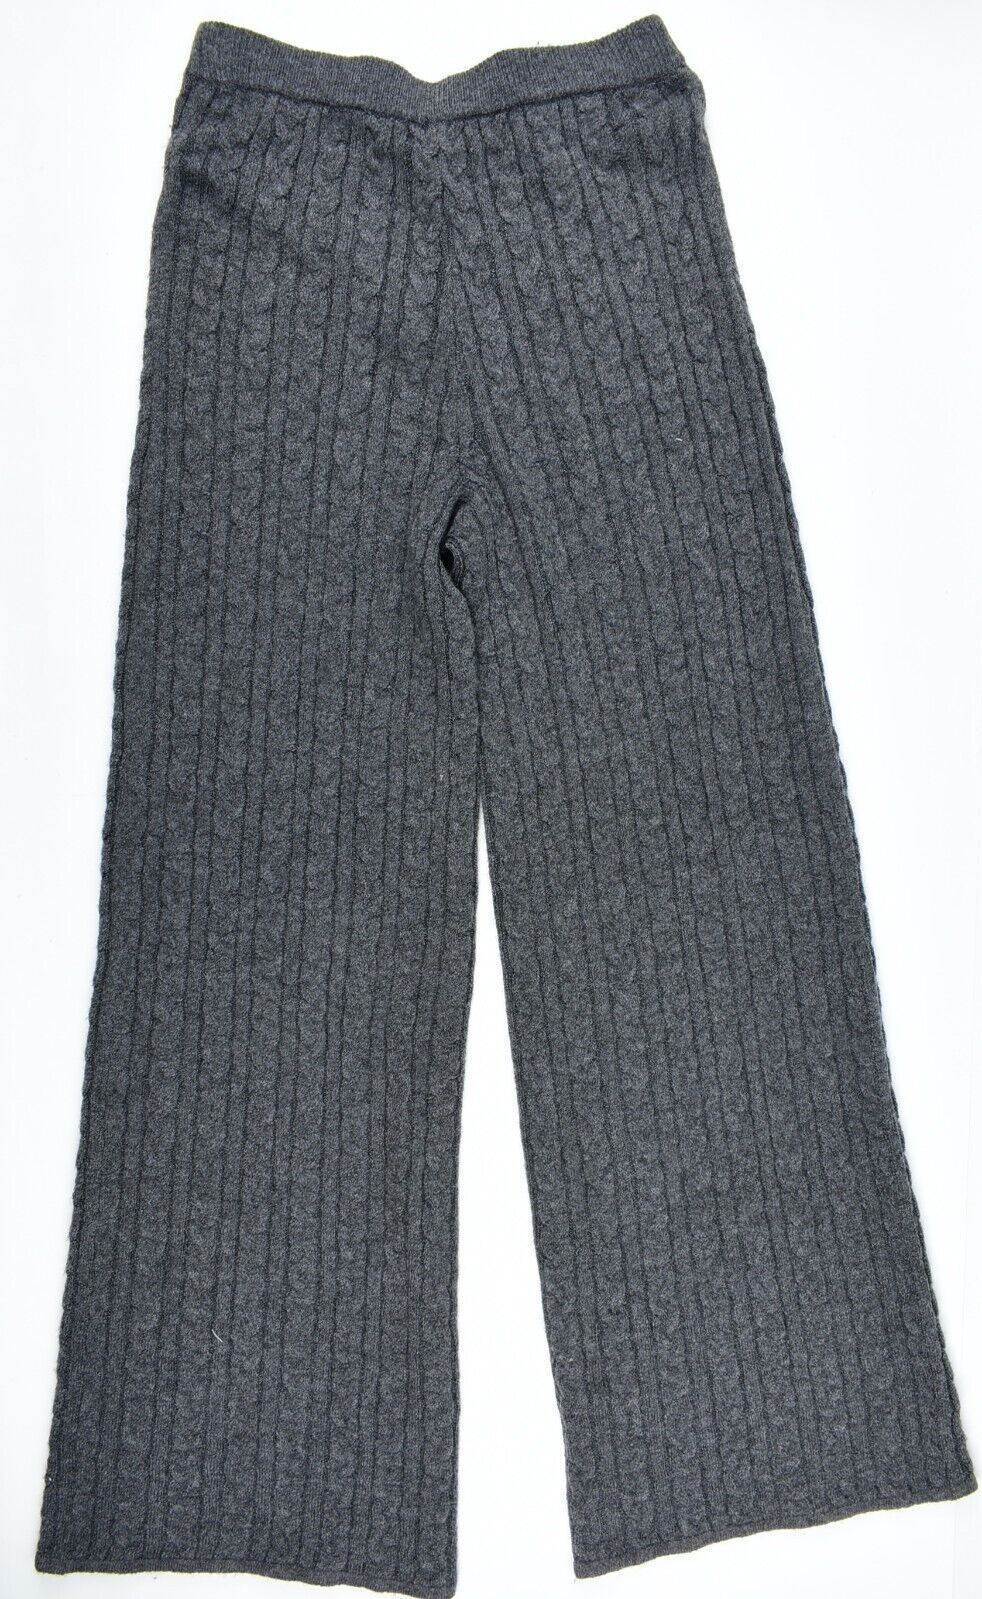 GUESS Womens TAMARA Cable Knit Trousers Pants, Charcoal Grey, size S /UK 8